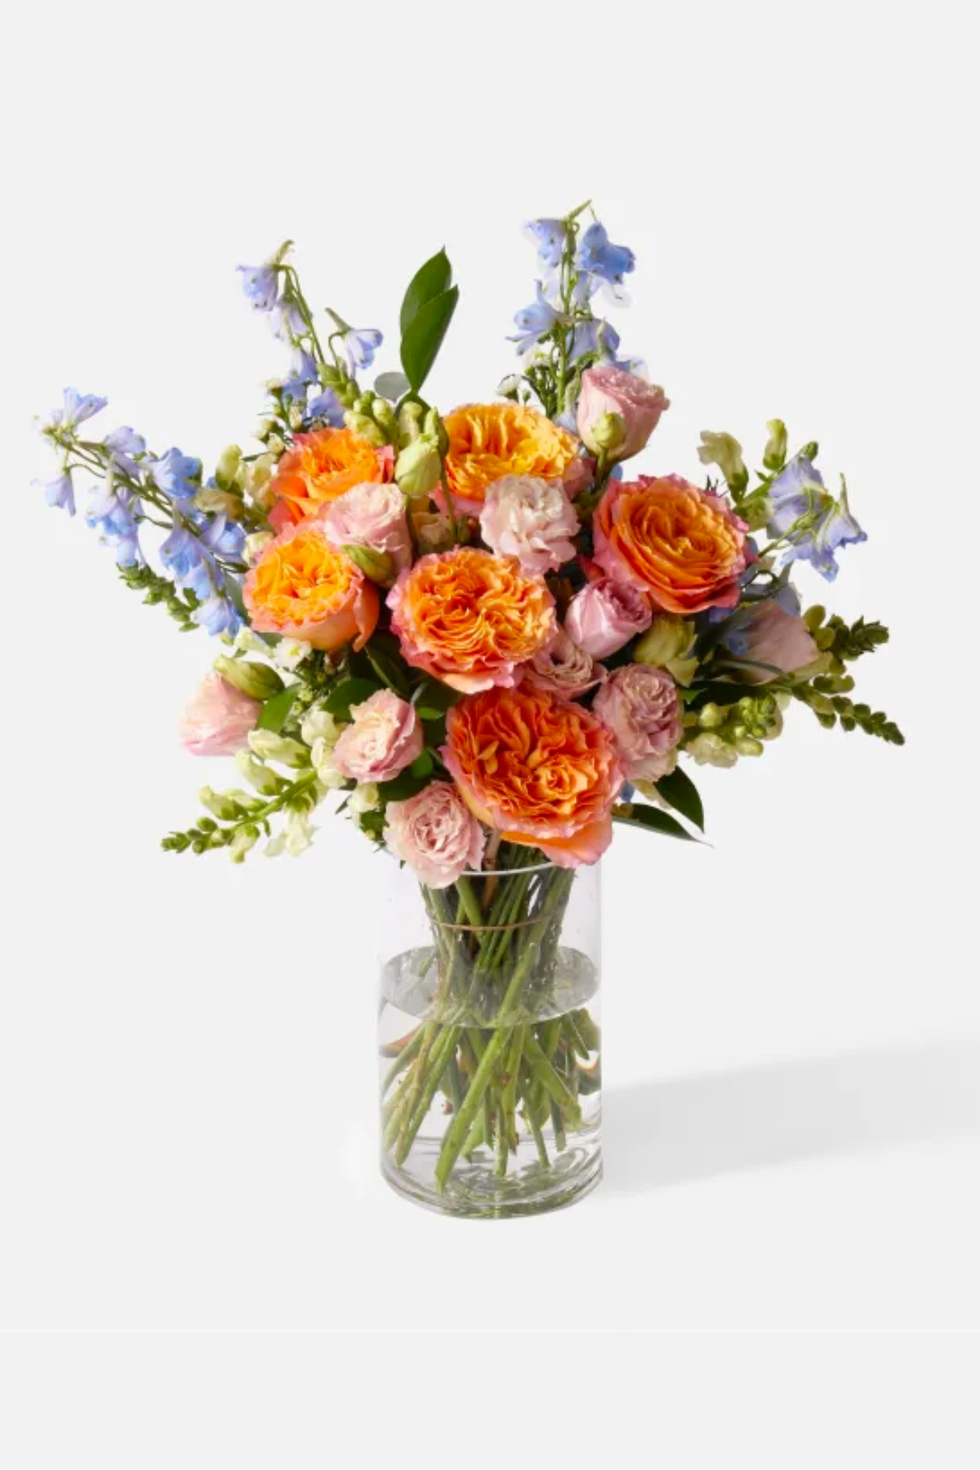 Best Flower Delivery Services of 2023 - Flowers to Order Online